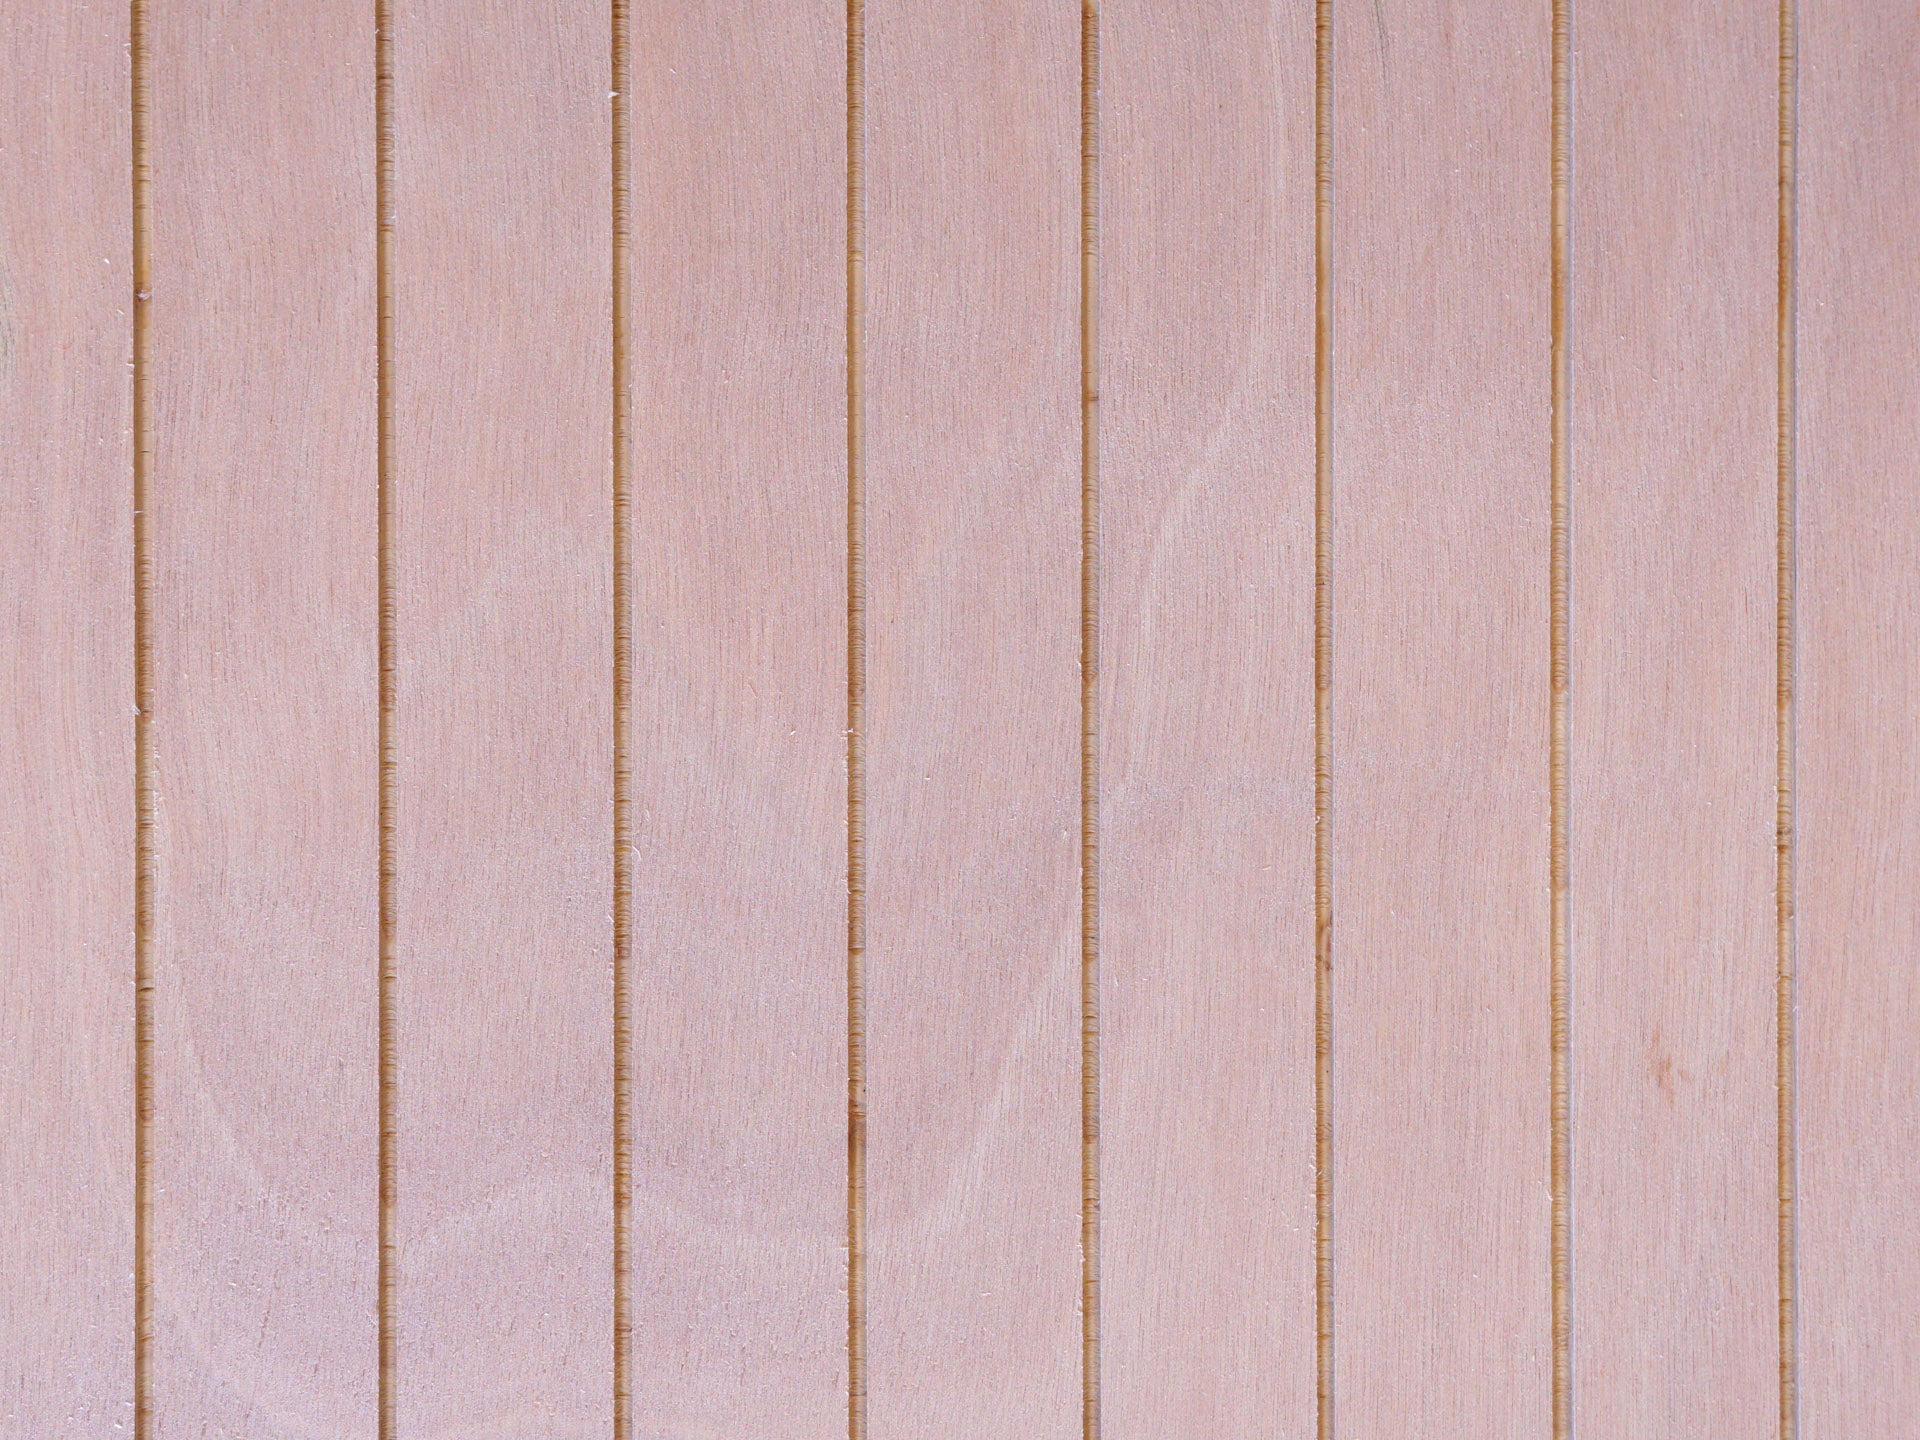 Close up of the Thinline pattern sample offered by Vintage Plywood Millworks